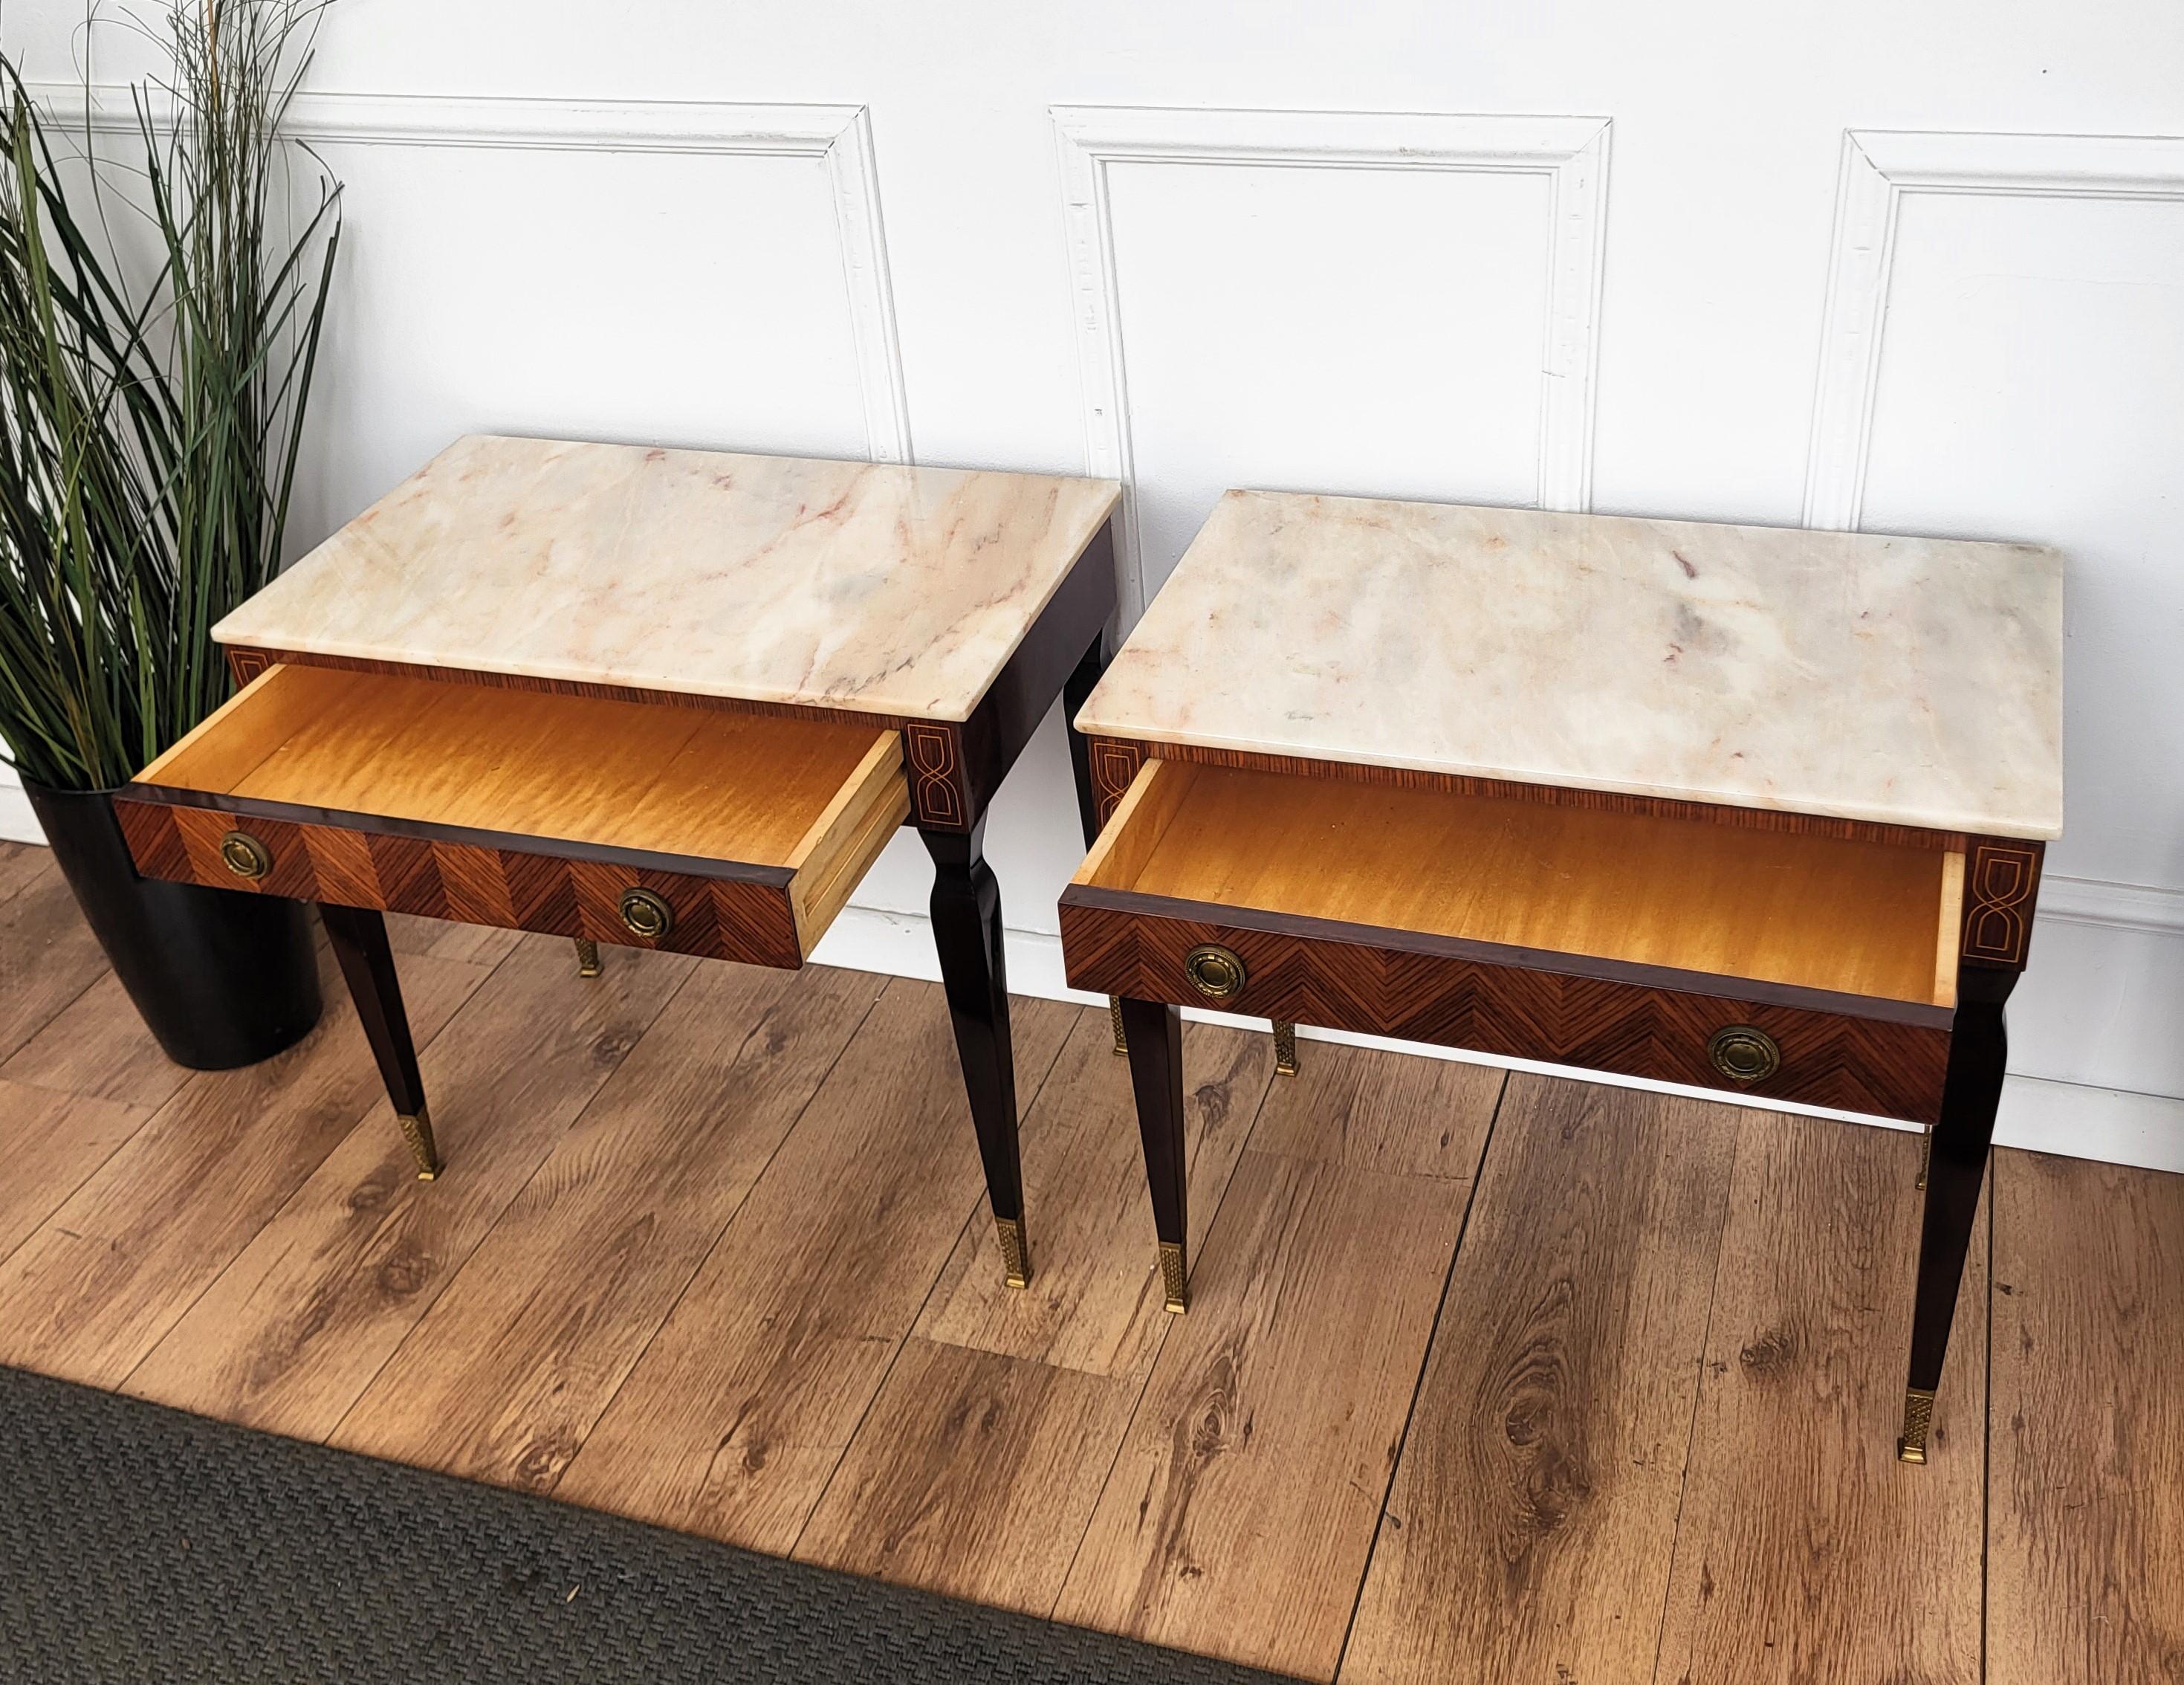 Pair of Italian Art Deco Marquetry Wood Marble Top Night Stands Bedside Tables For Sale 2